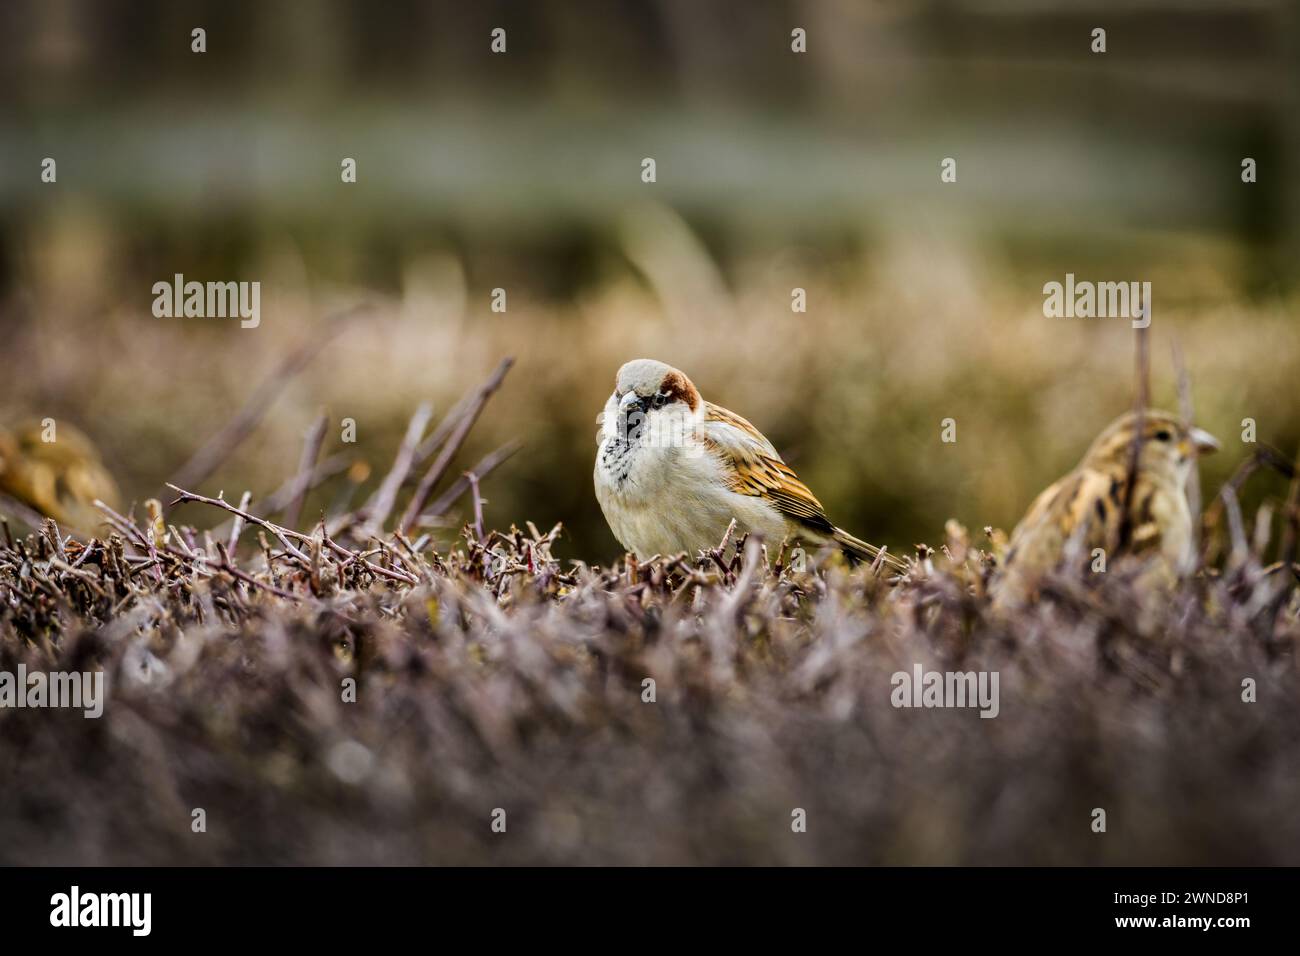 Small Bird Perched on Grass-Covered Field Stock Photo